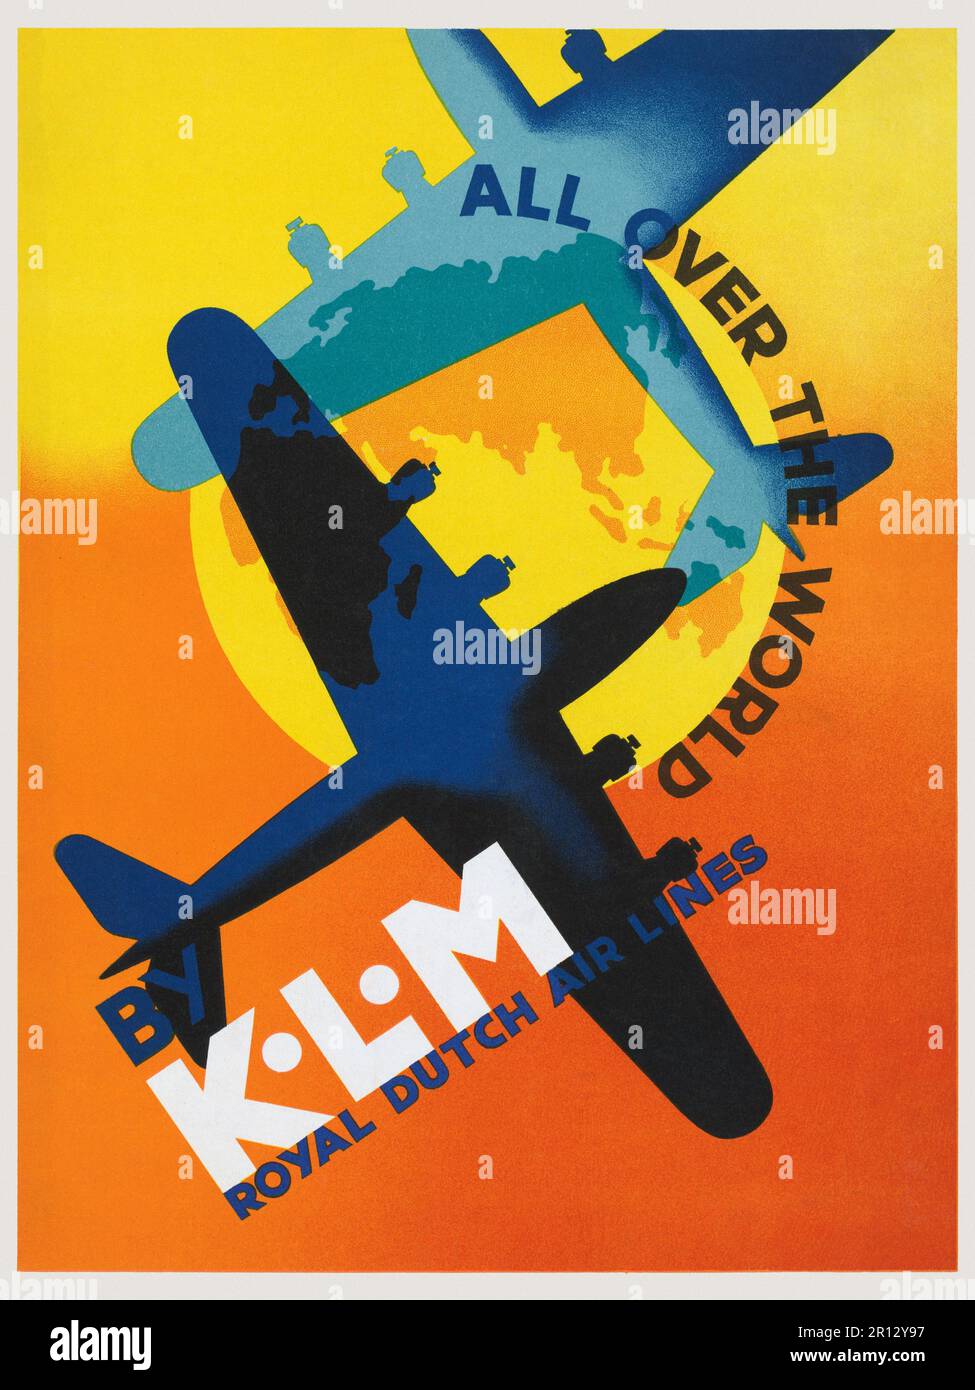 All Over the World by KLM. Royal Dutch Airlines. Artist unknown. Poster published in the 1930s in the Netherlands. Stock Photo